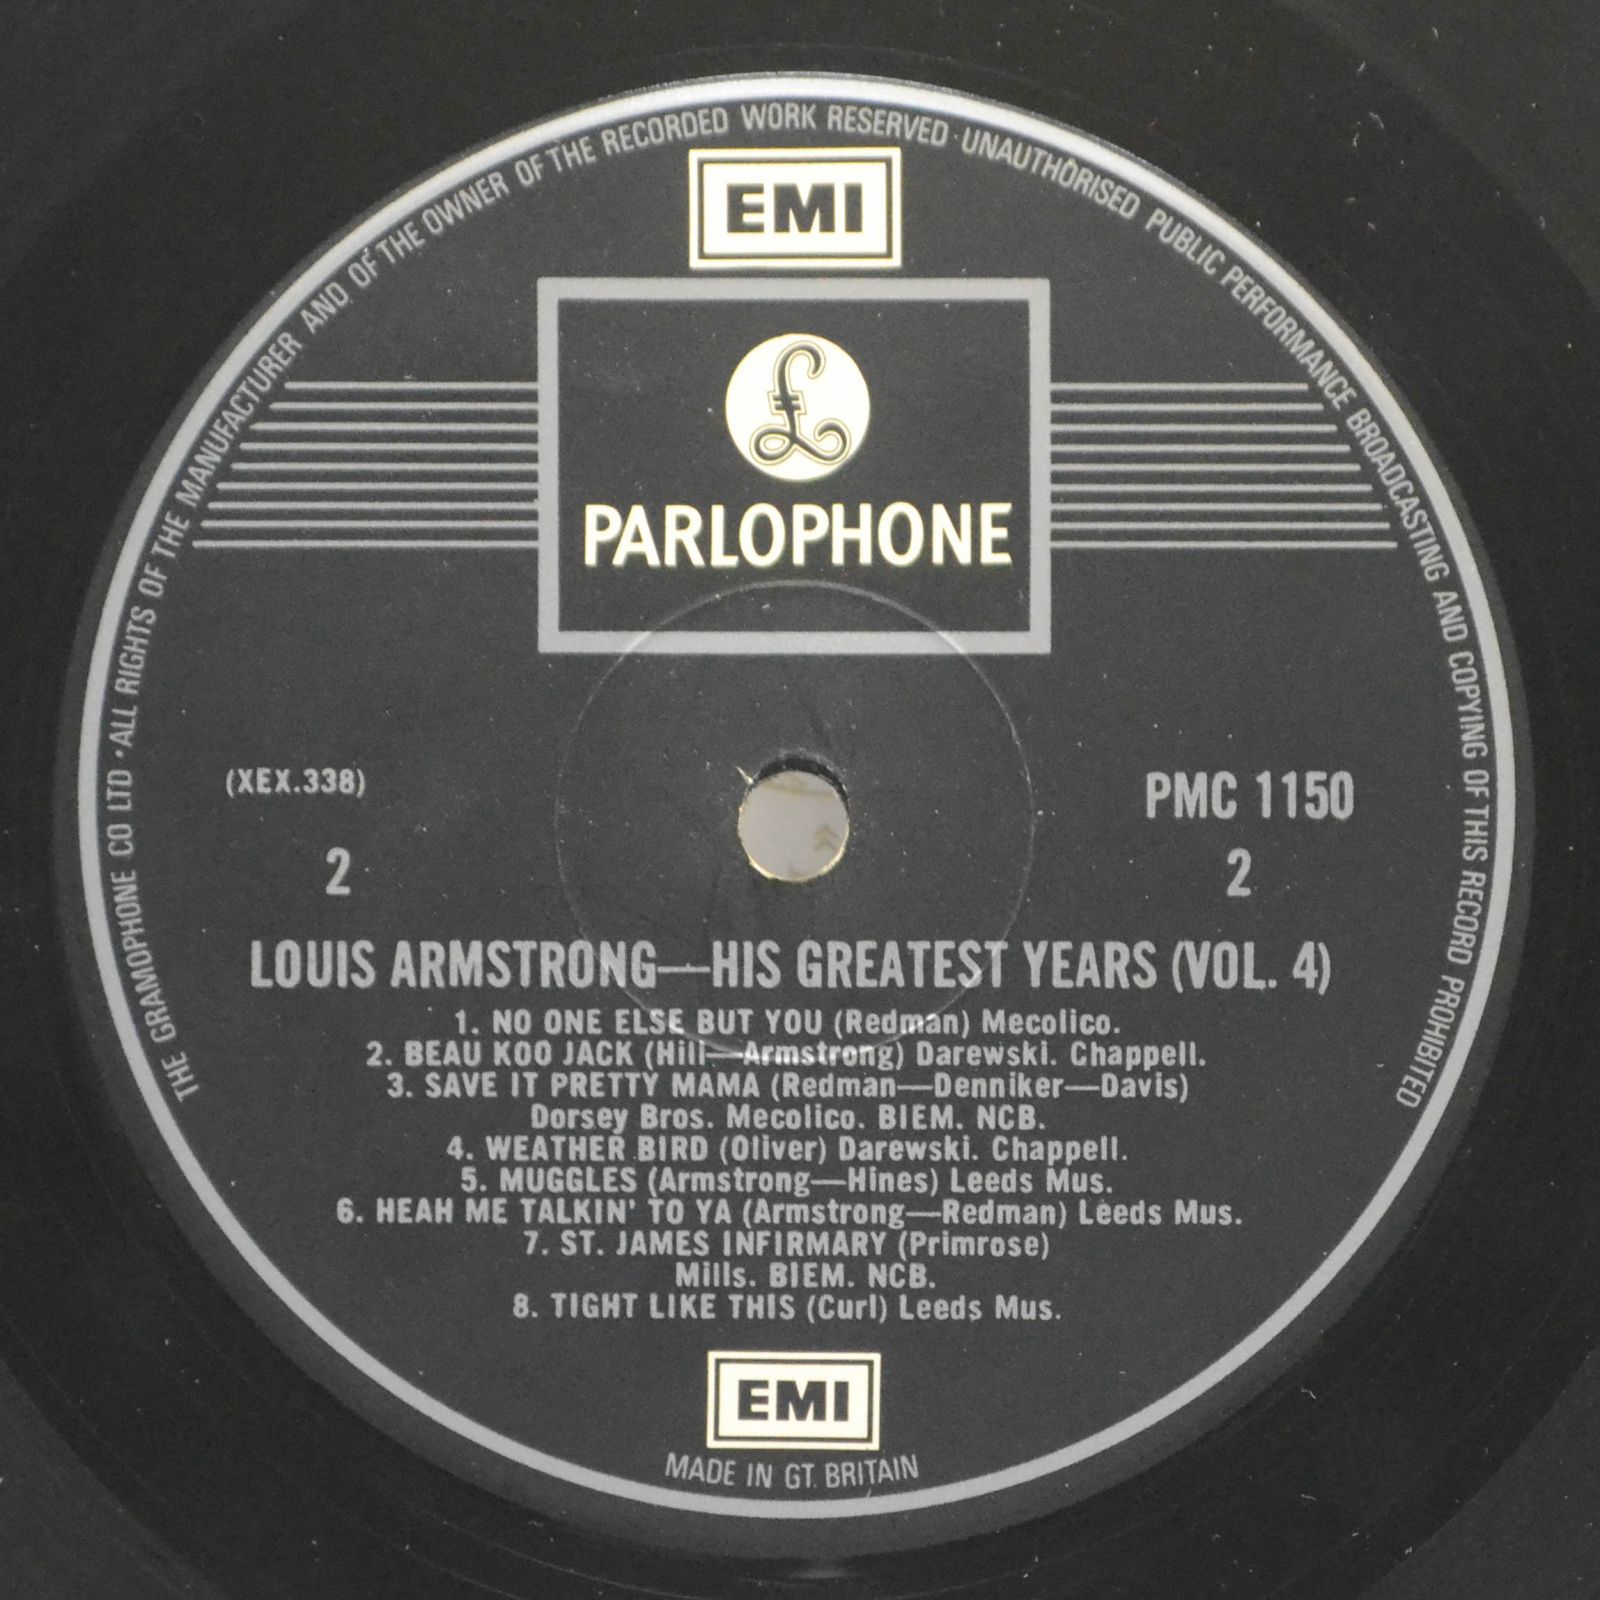 Louis Armstrong — His Greatest Years - Volume 4 (UK), 1961